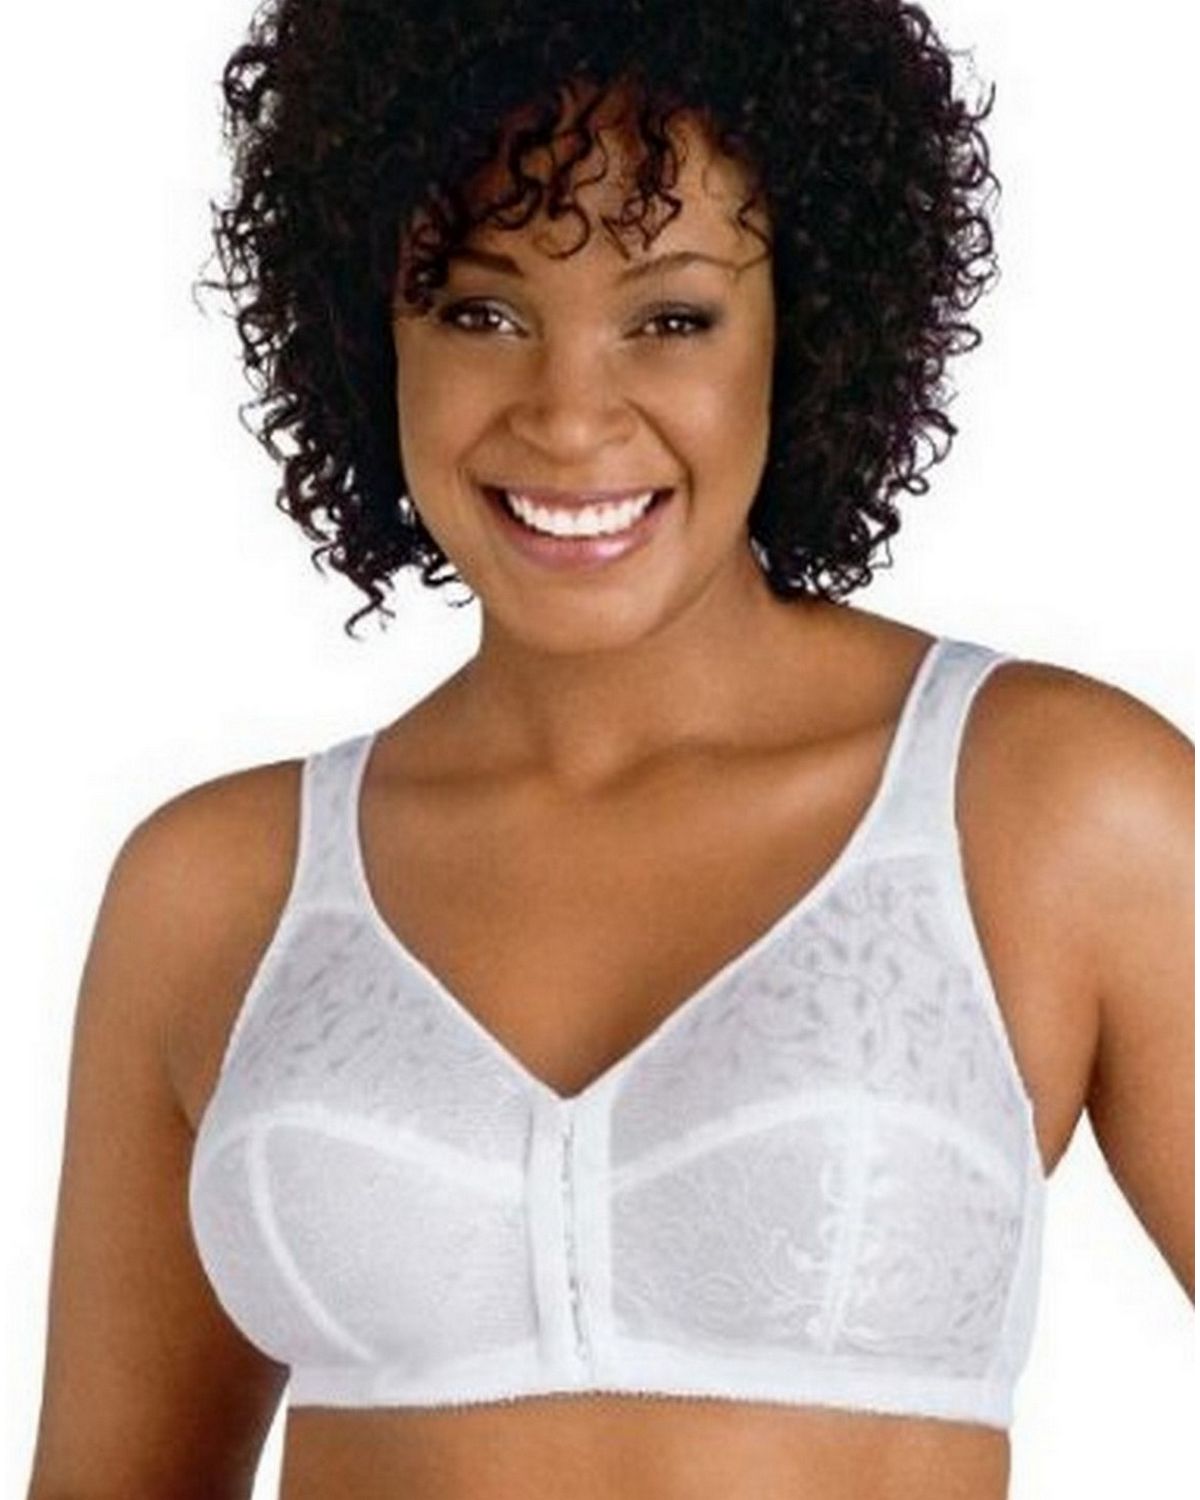 Just My Size MJ1107 Comfort Cushion Strap Front Close Bra